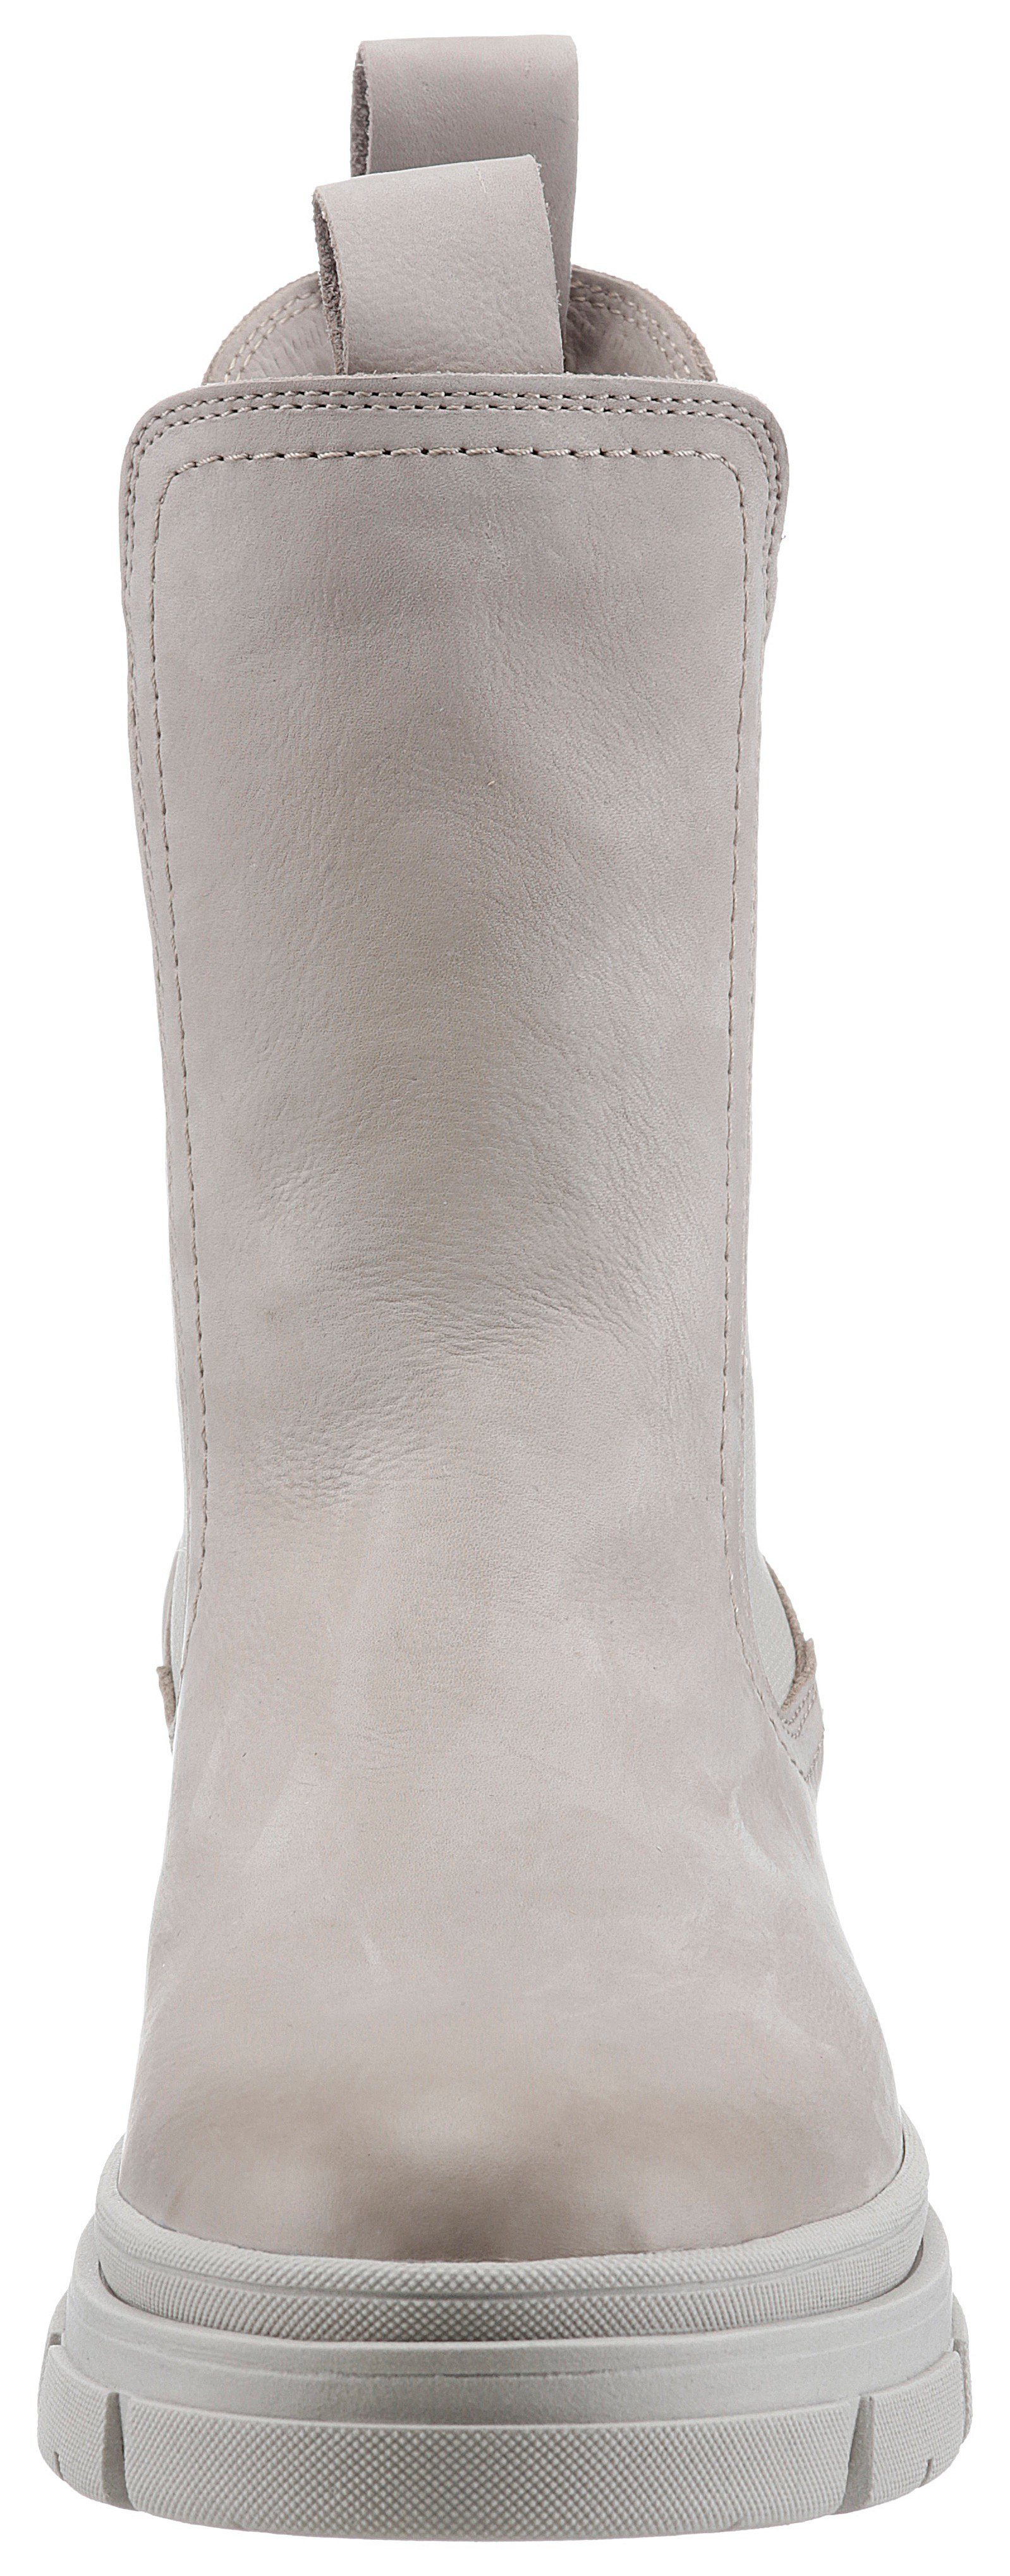 Tamaris Chelseaboots bequemer taupe Form in